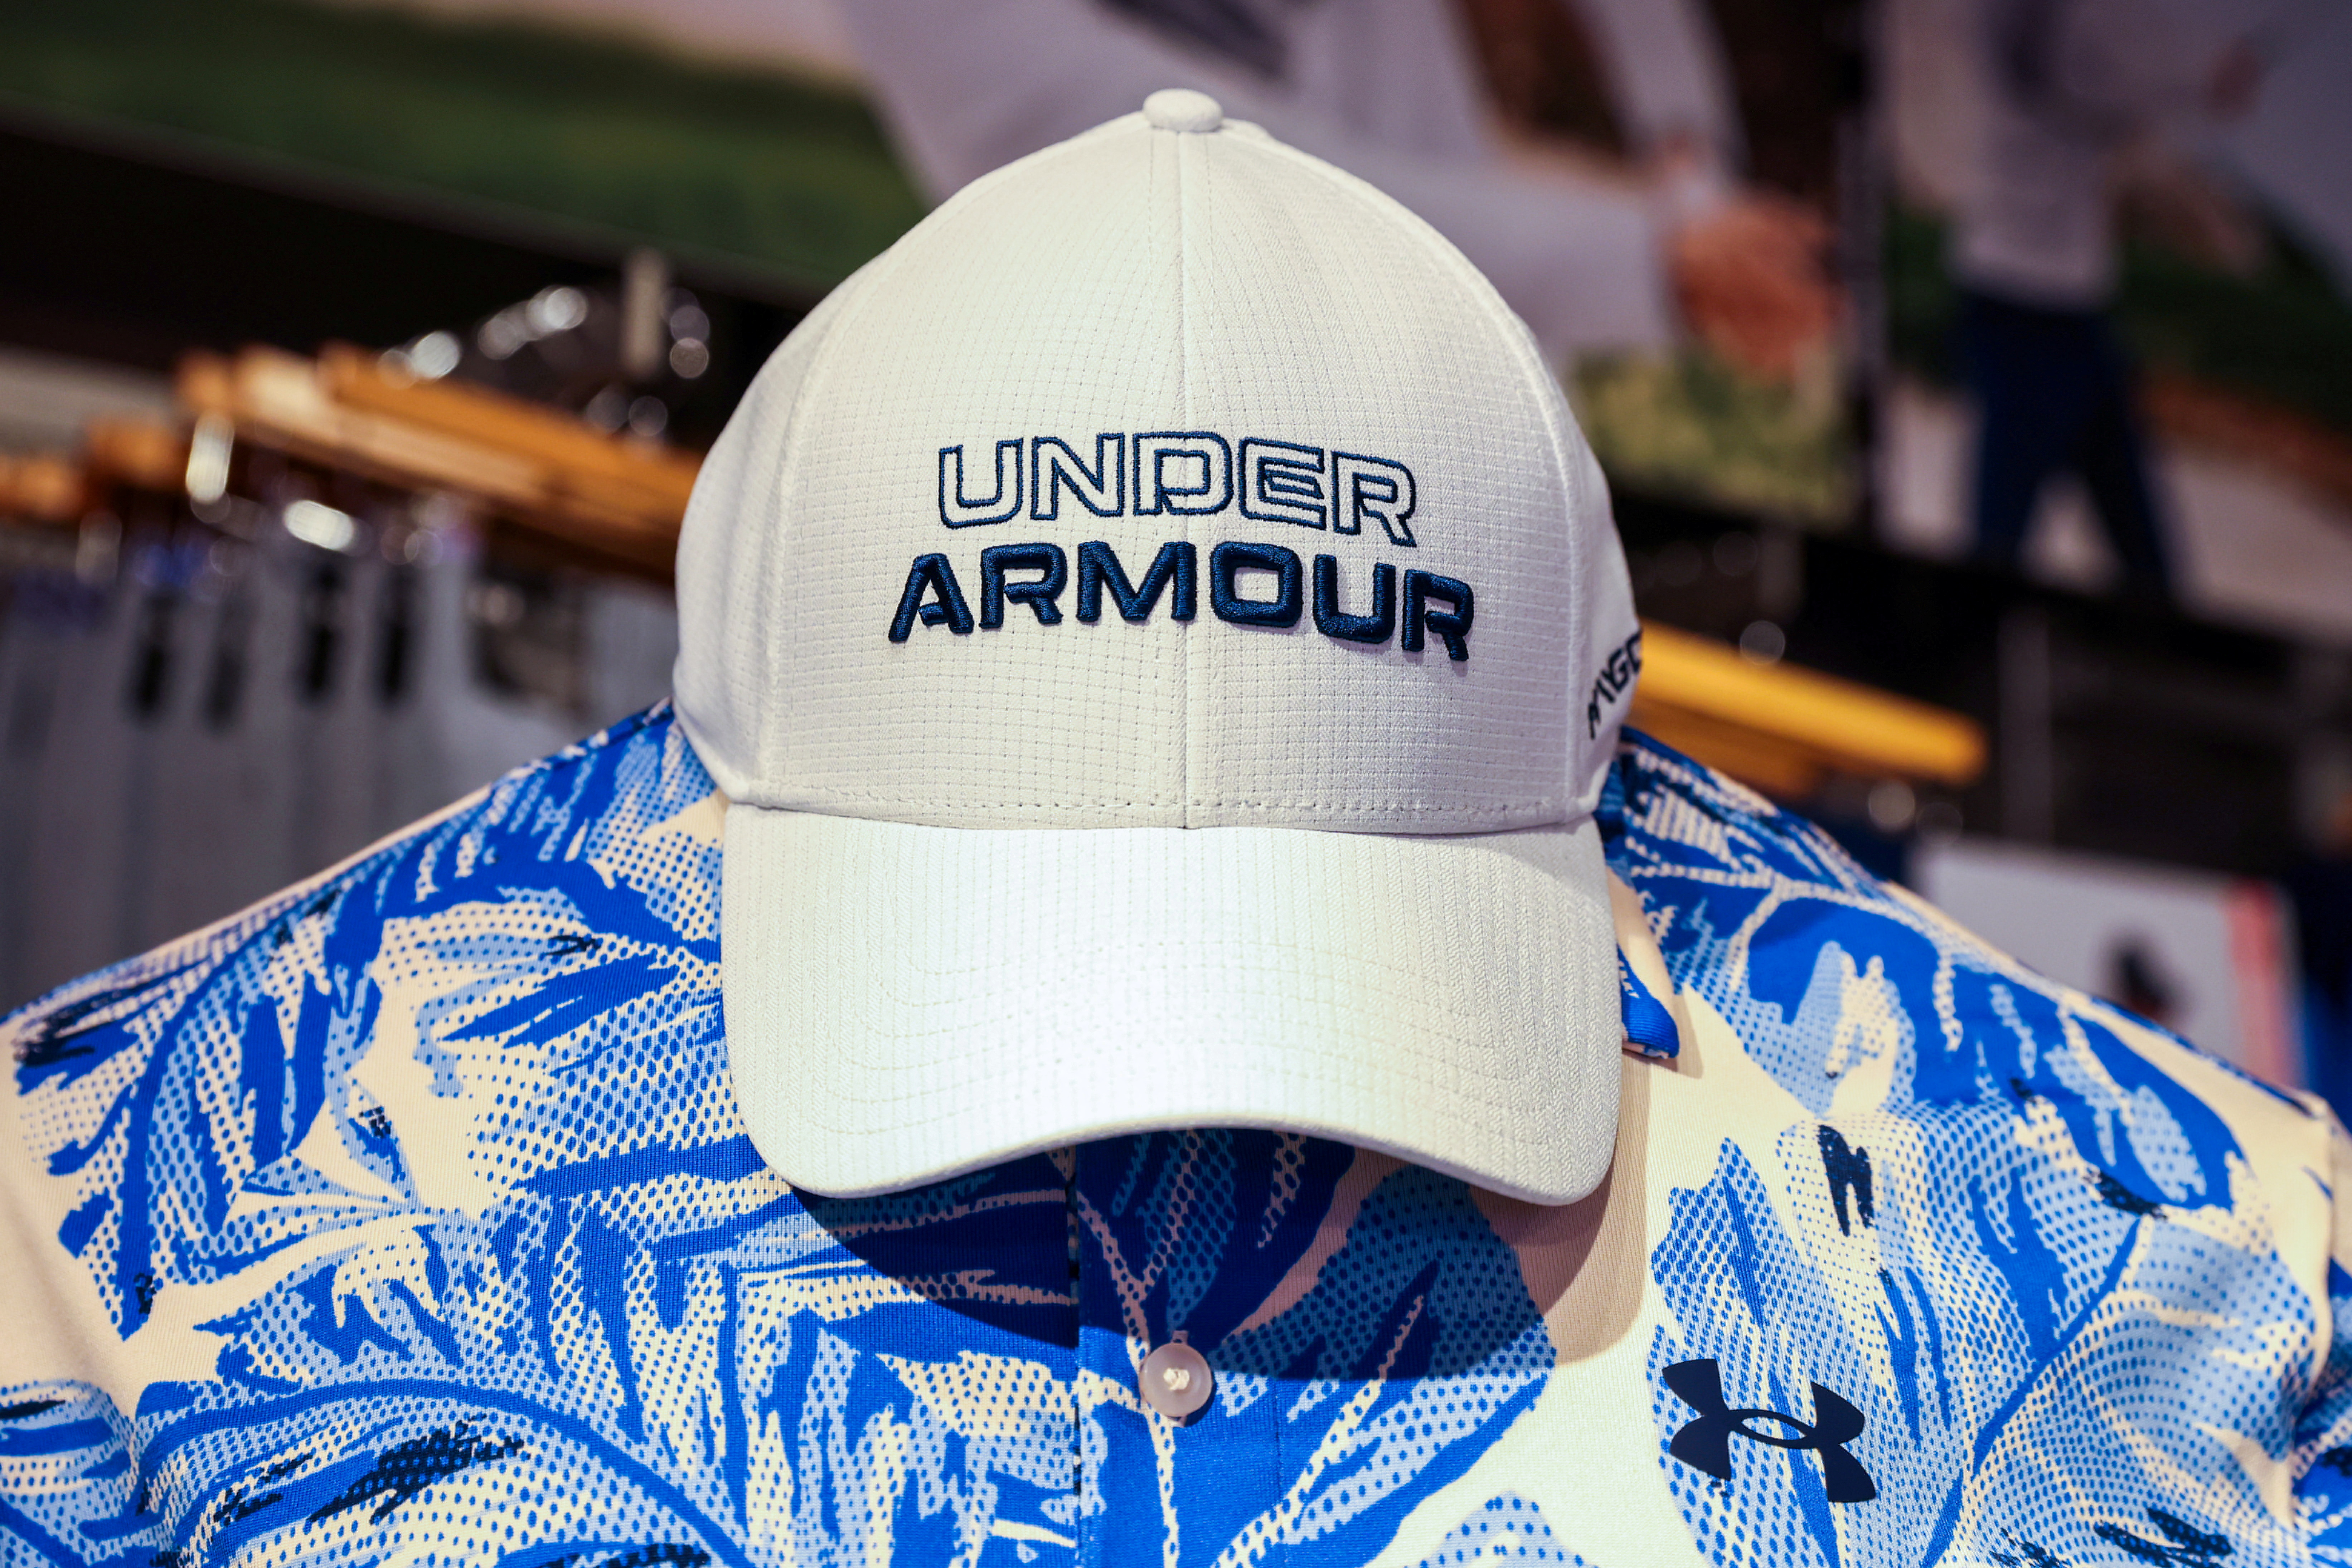 Under Armour cuts forecasts on weak demand, higher discounts